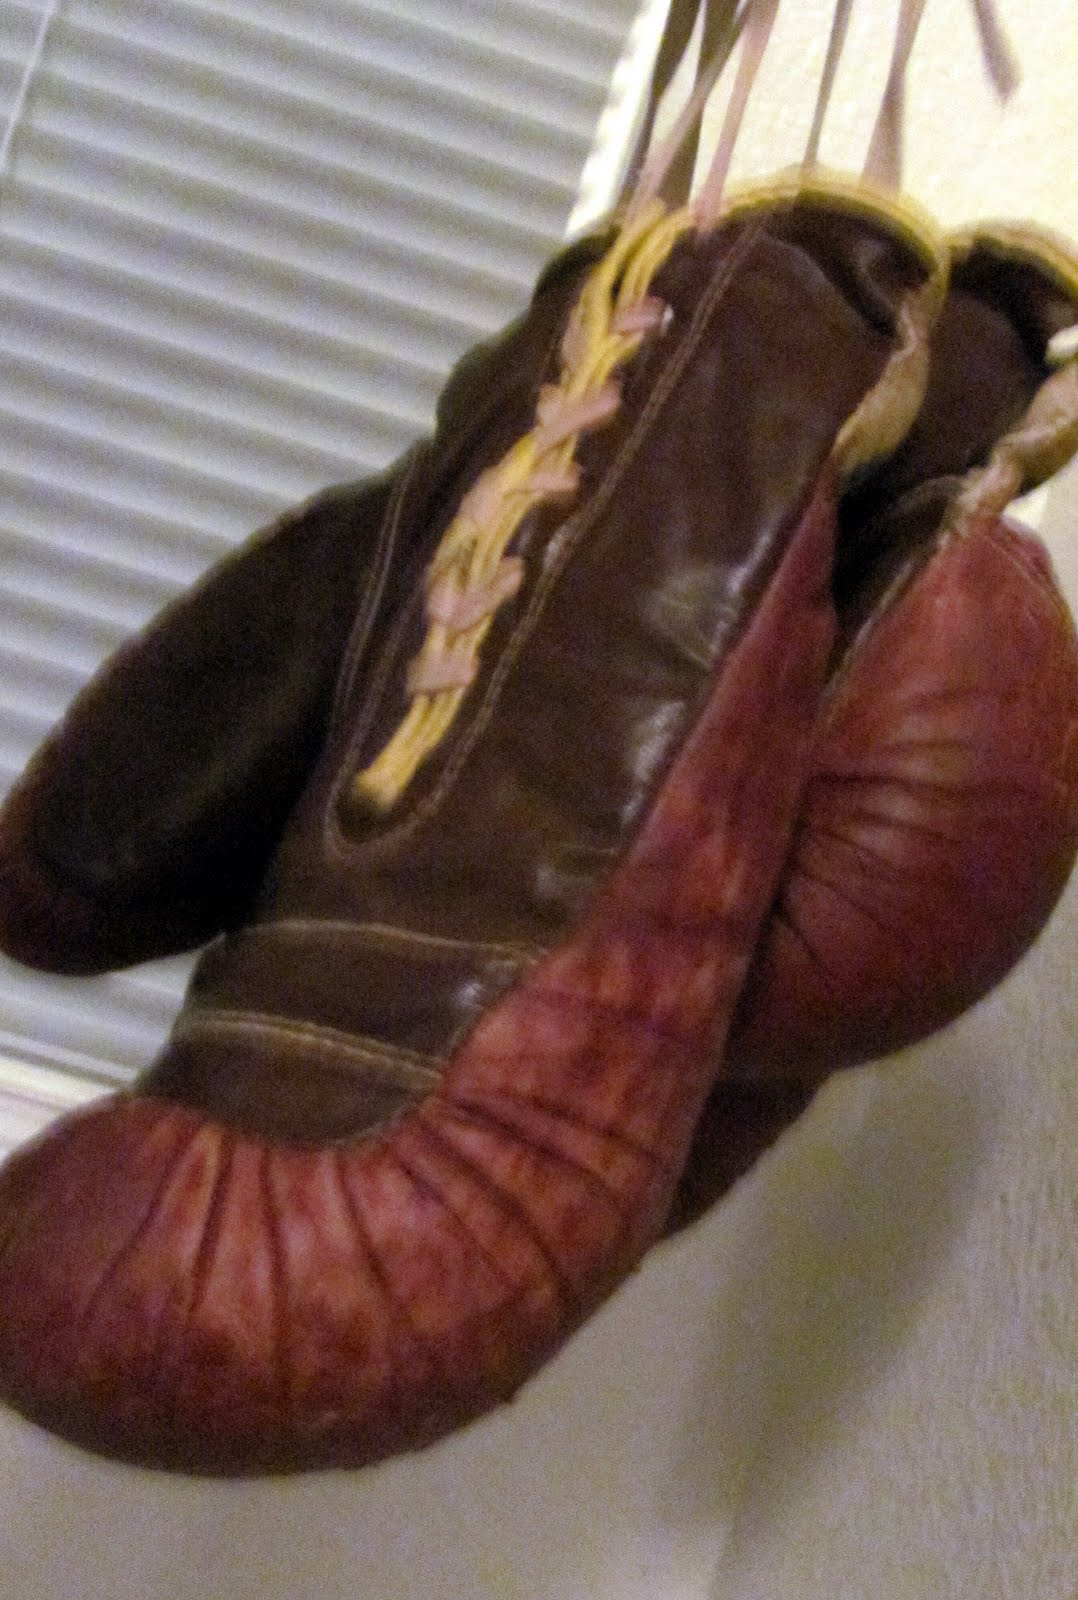 A rare find: Old Boxing Gloves